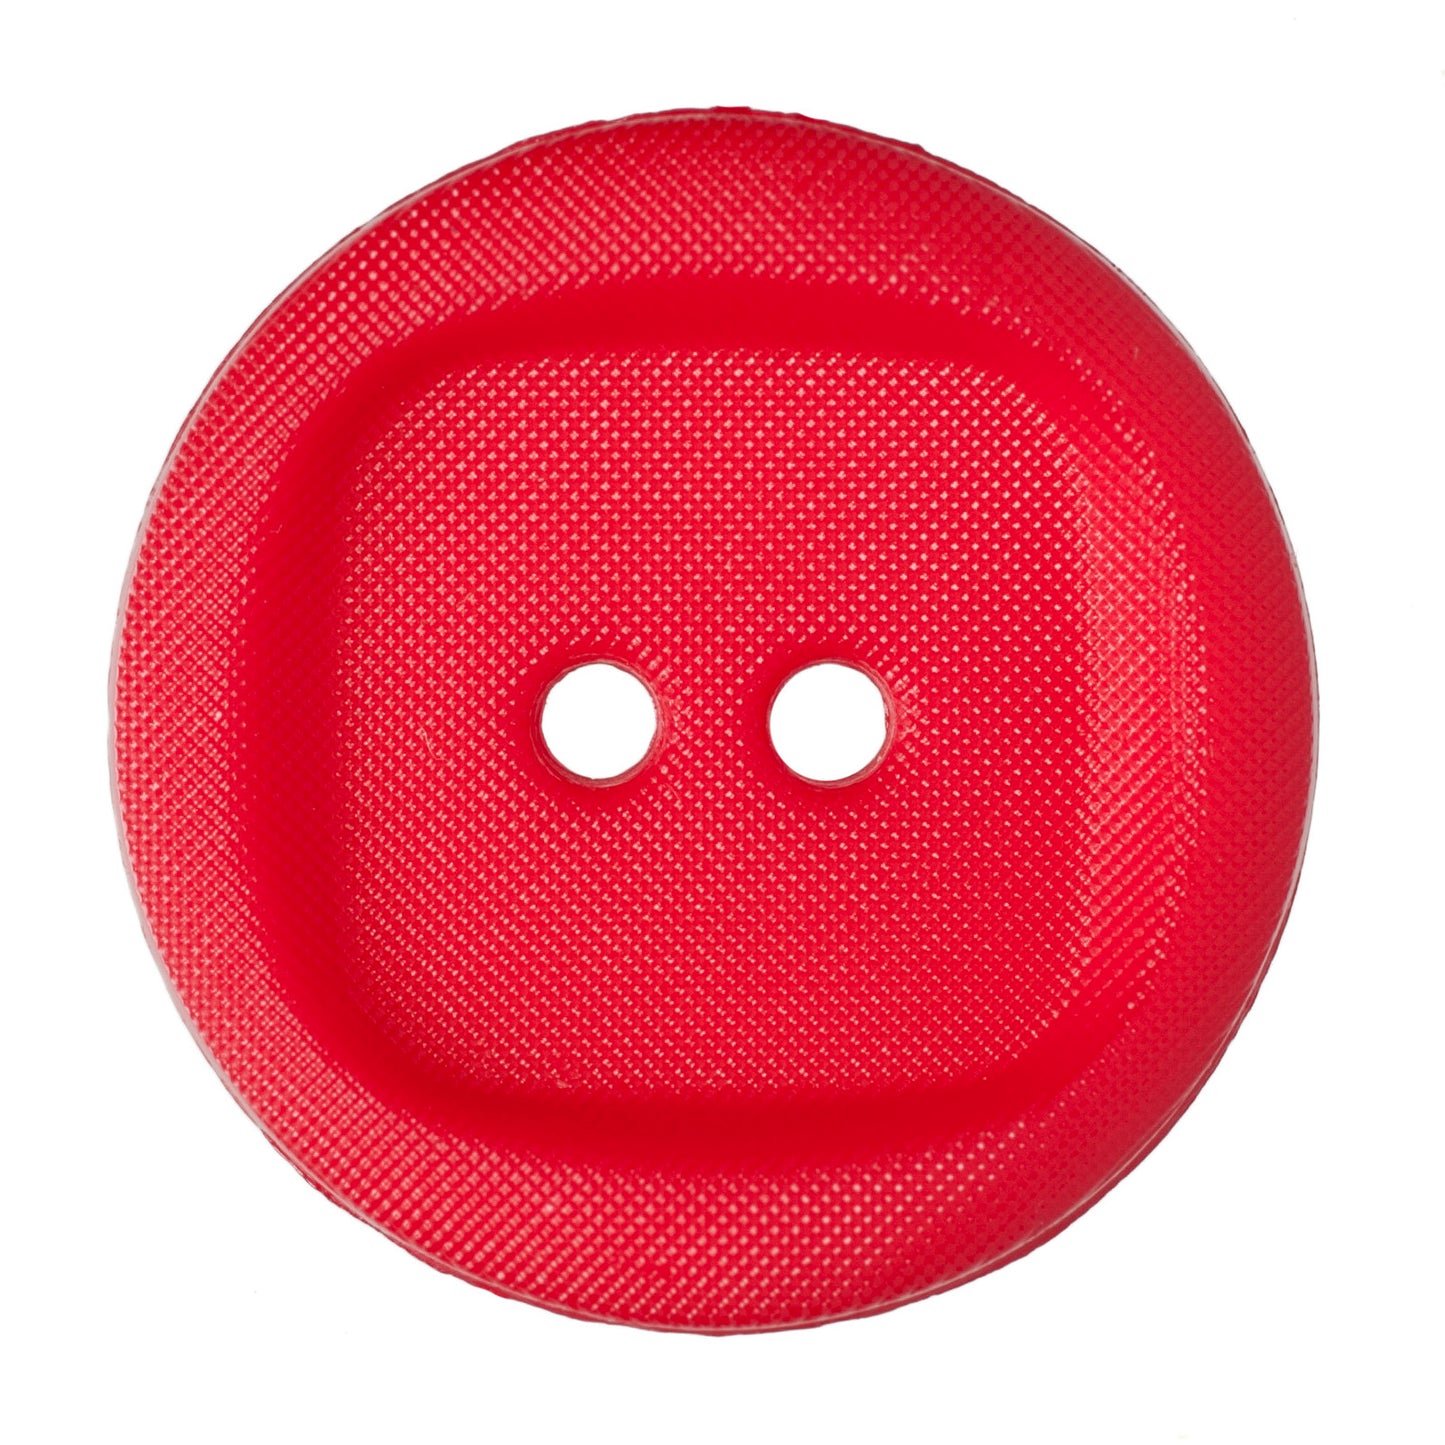 2 Hole Wavy with Square Insert Button - 20mm - Red [LD6.6]